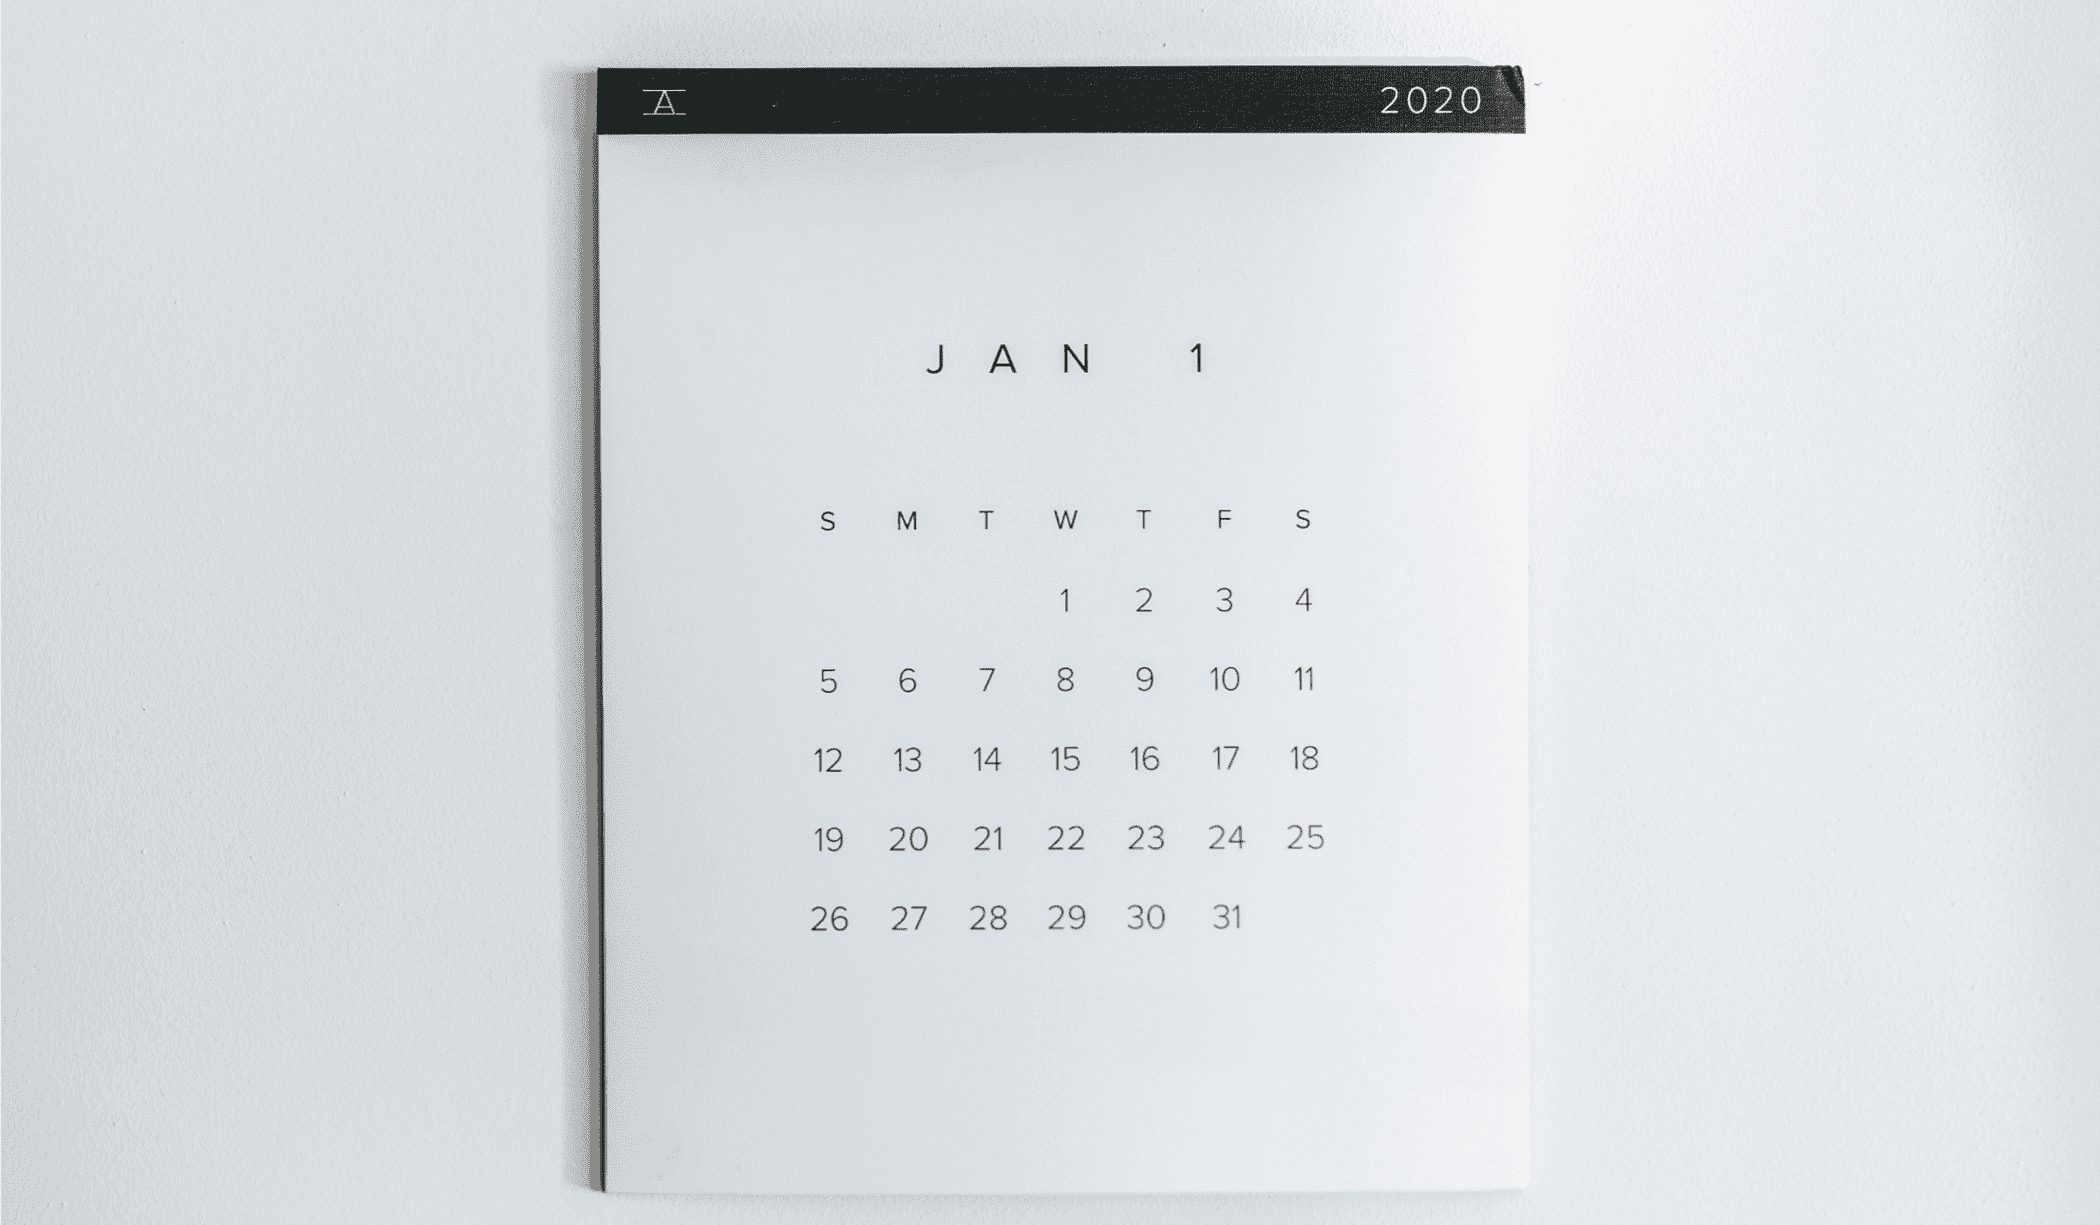 black and white image of January 1 calendar page on a white wall